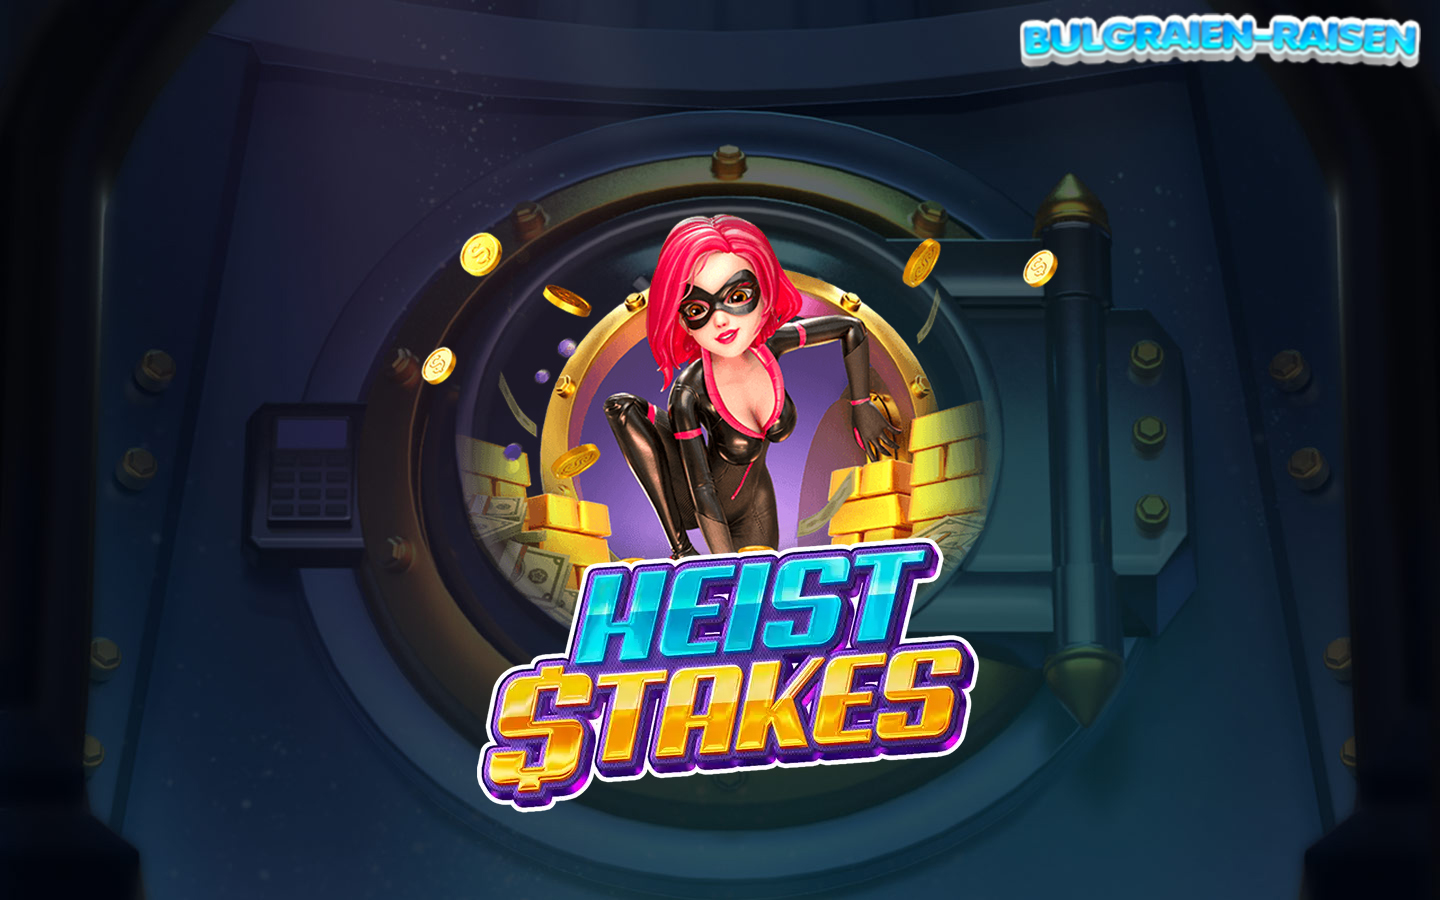 Heist Stakes PgSoft